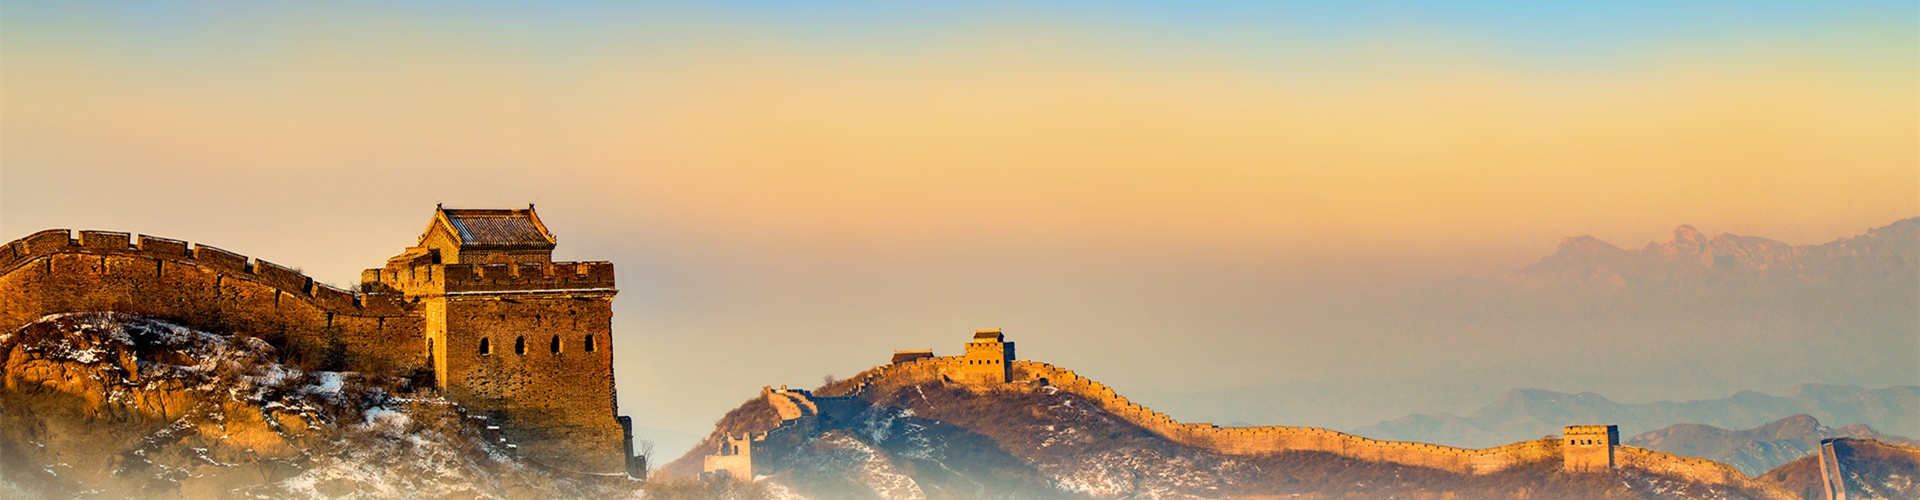 The Great Wall of China - the Longest Fortification in the World